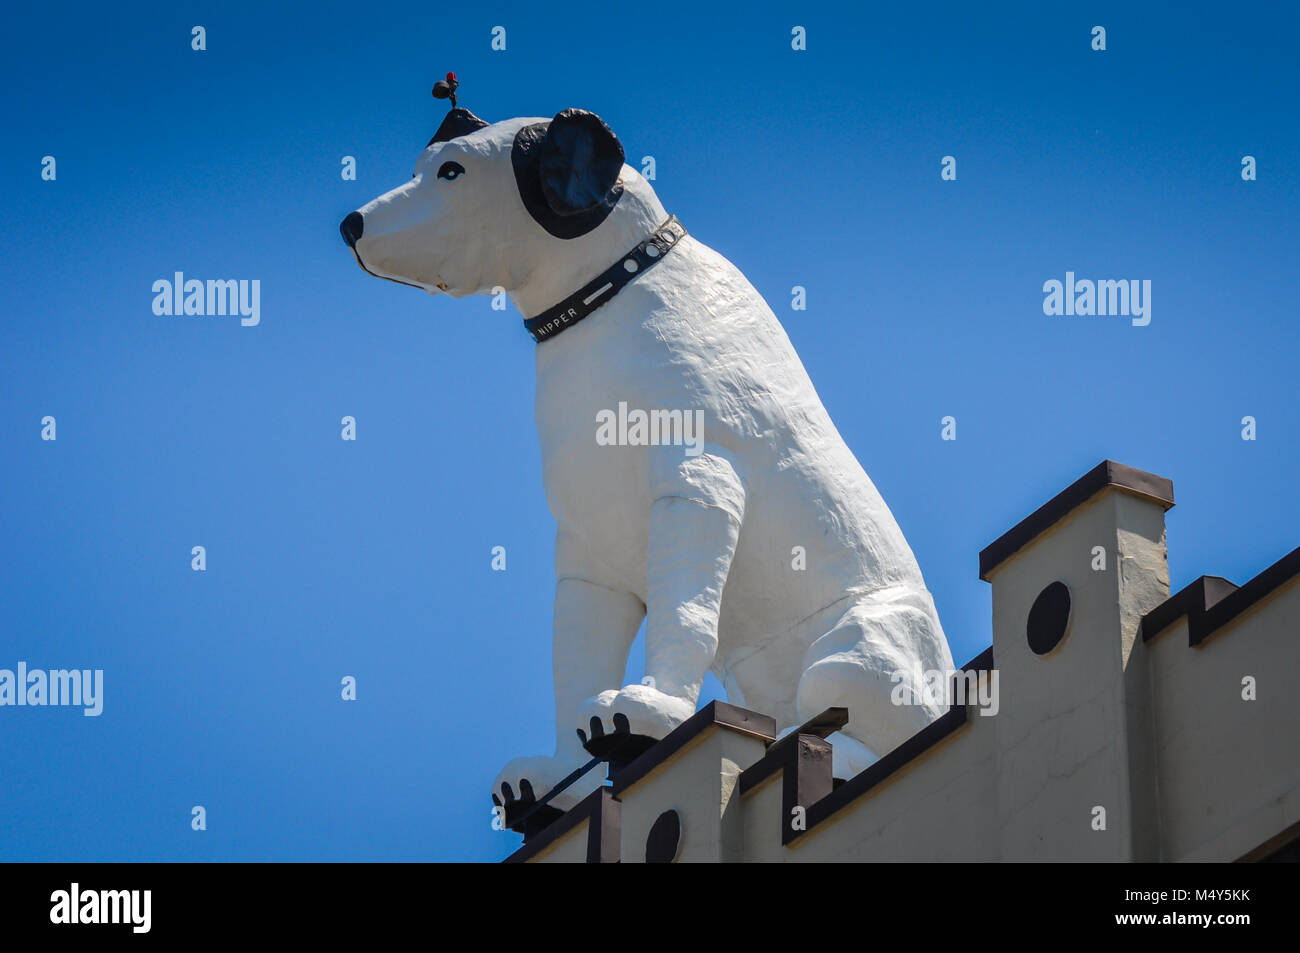 White dog statue, likeness of RCA mascot Nipper, perched on top of a building with a bright blue sky background, in Albany, New York. Stock Photo